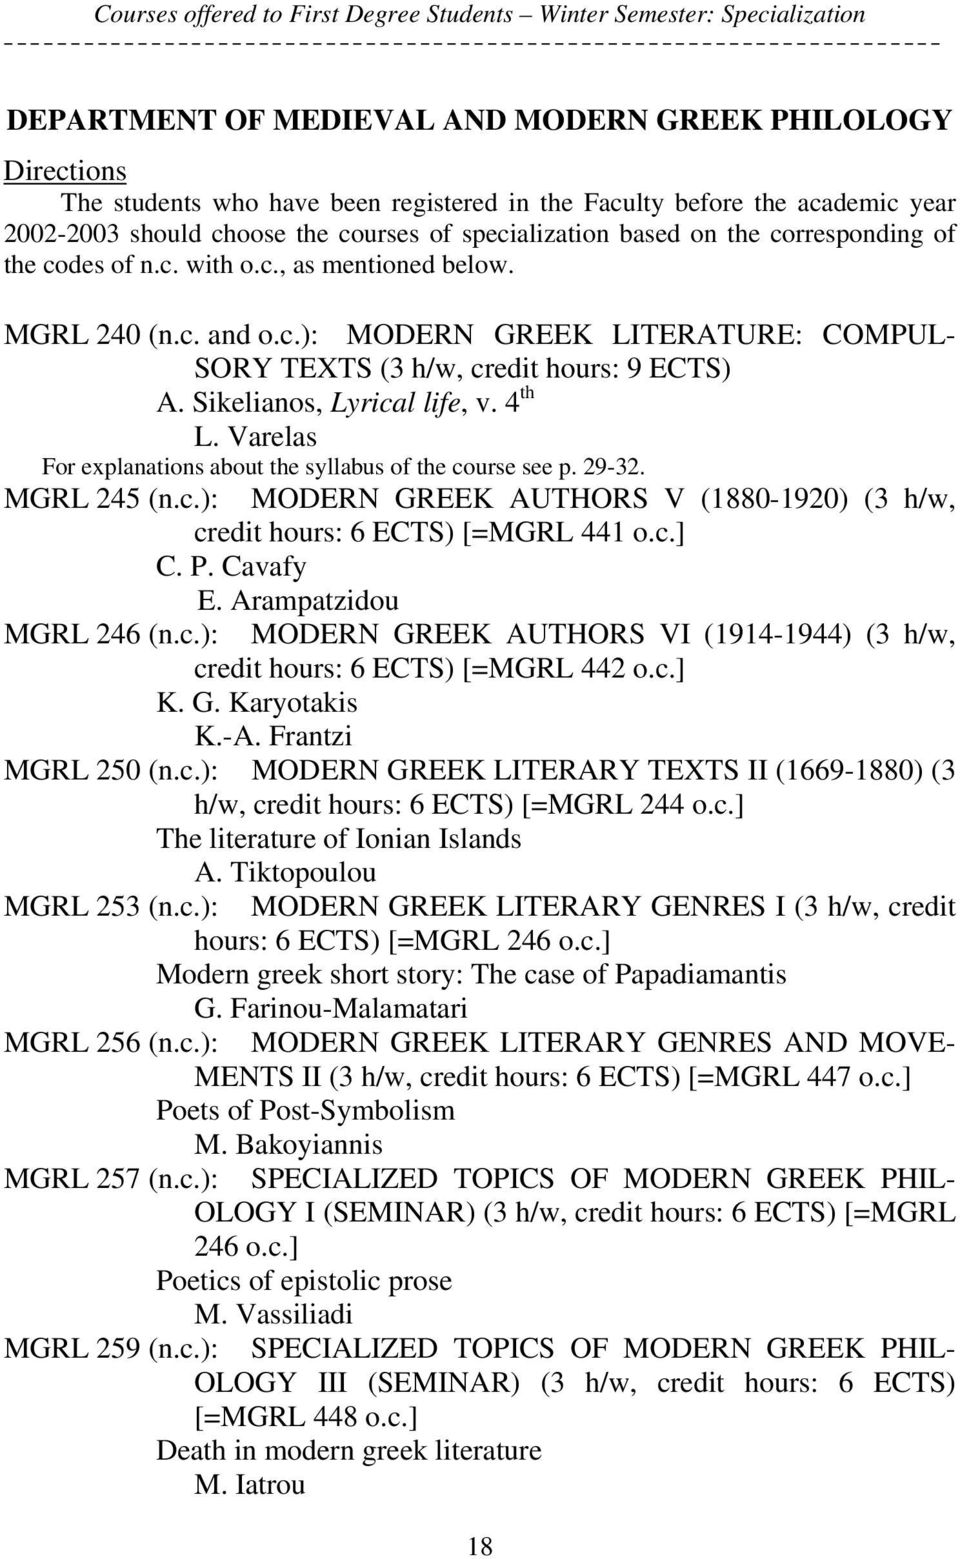 Sikelianos, Lyrical life, v. 4 th L. Varelas For explanations about the syllabus of the course see p. 29-32. MGRL 245 (n.c.): MODERN GREEK AUTHORS V (1880-1920) (3 h/w, credit hours: 6 ECTS) [=MGRL 441 o.